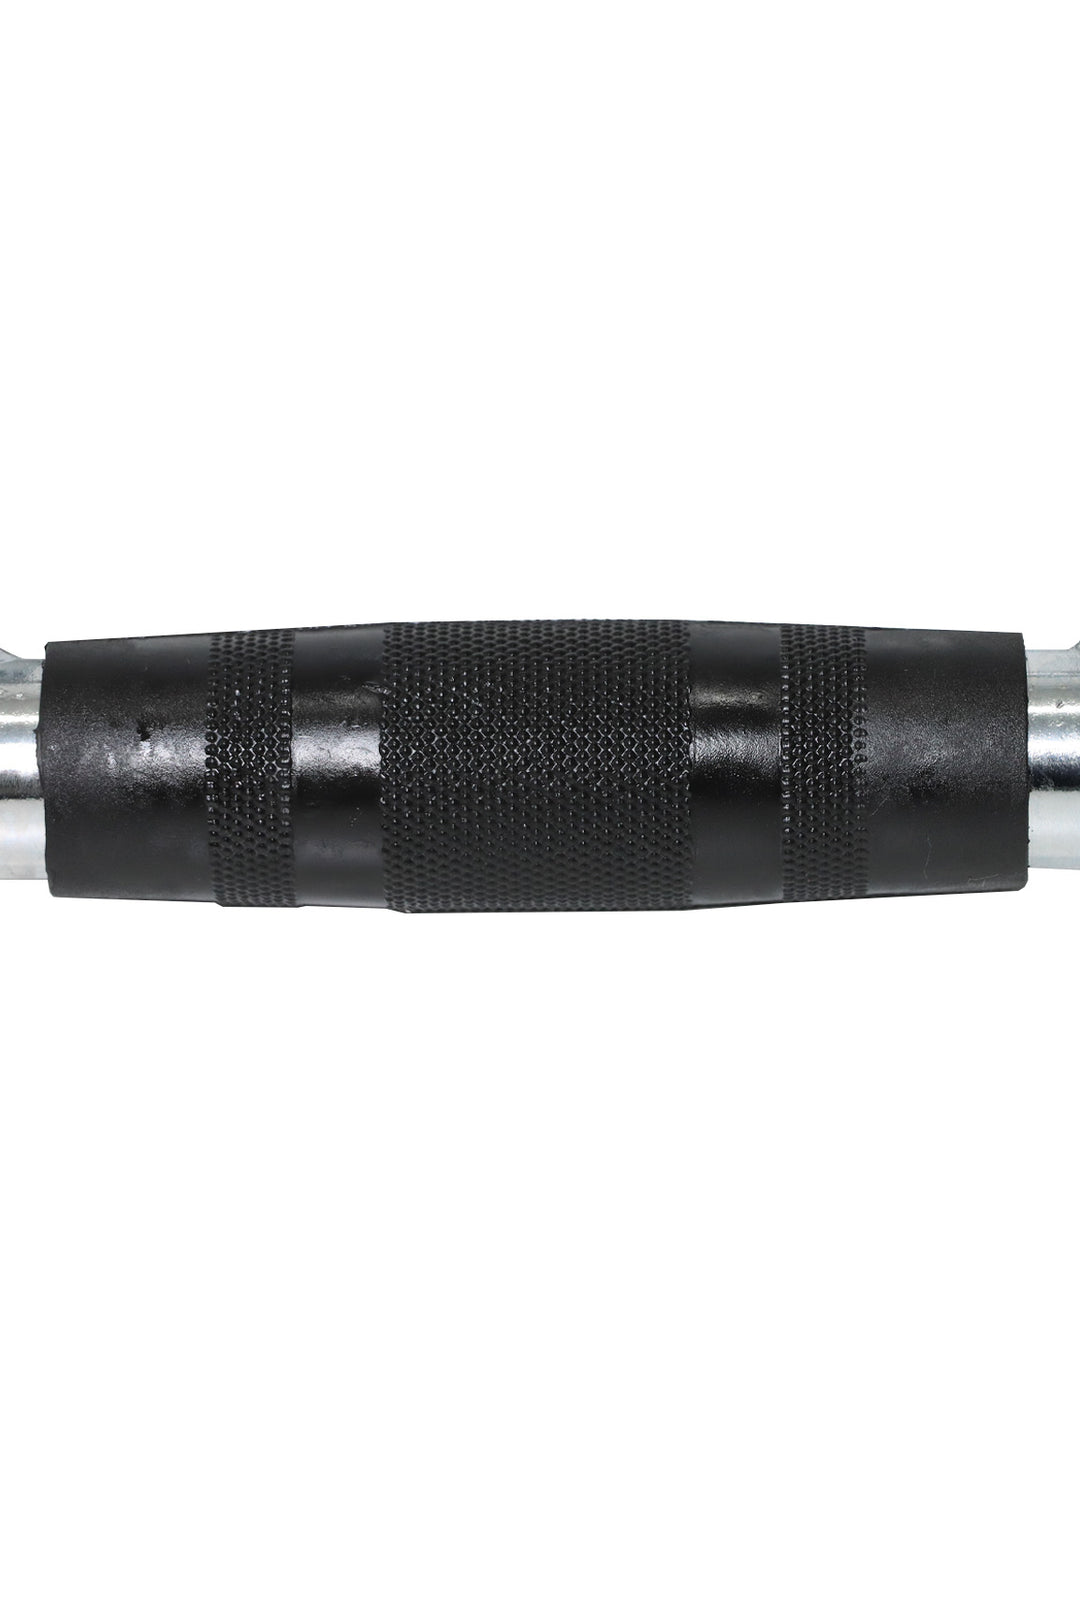 Nirvana Rubber Grip Seated Row Cable Attachment Commercial Grade